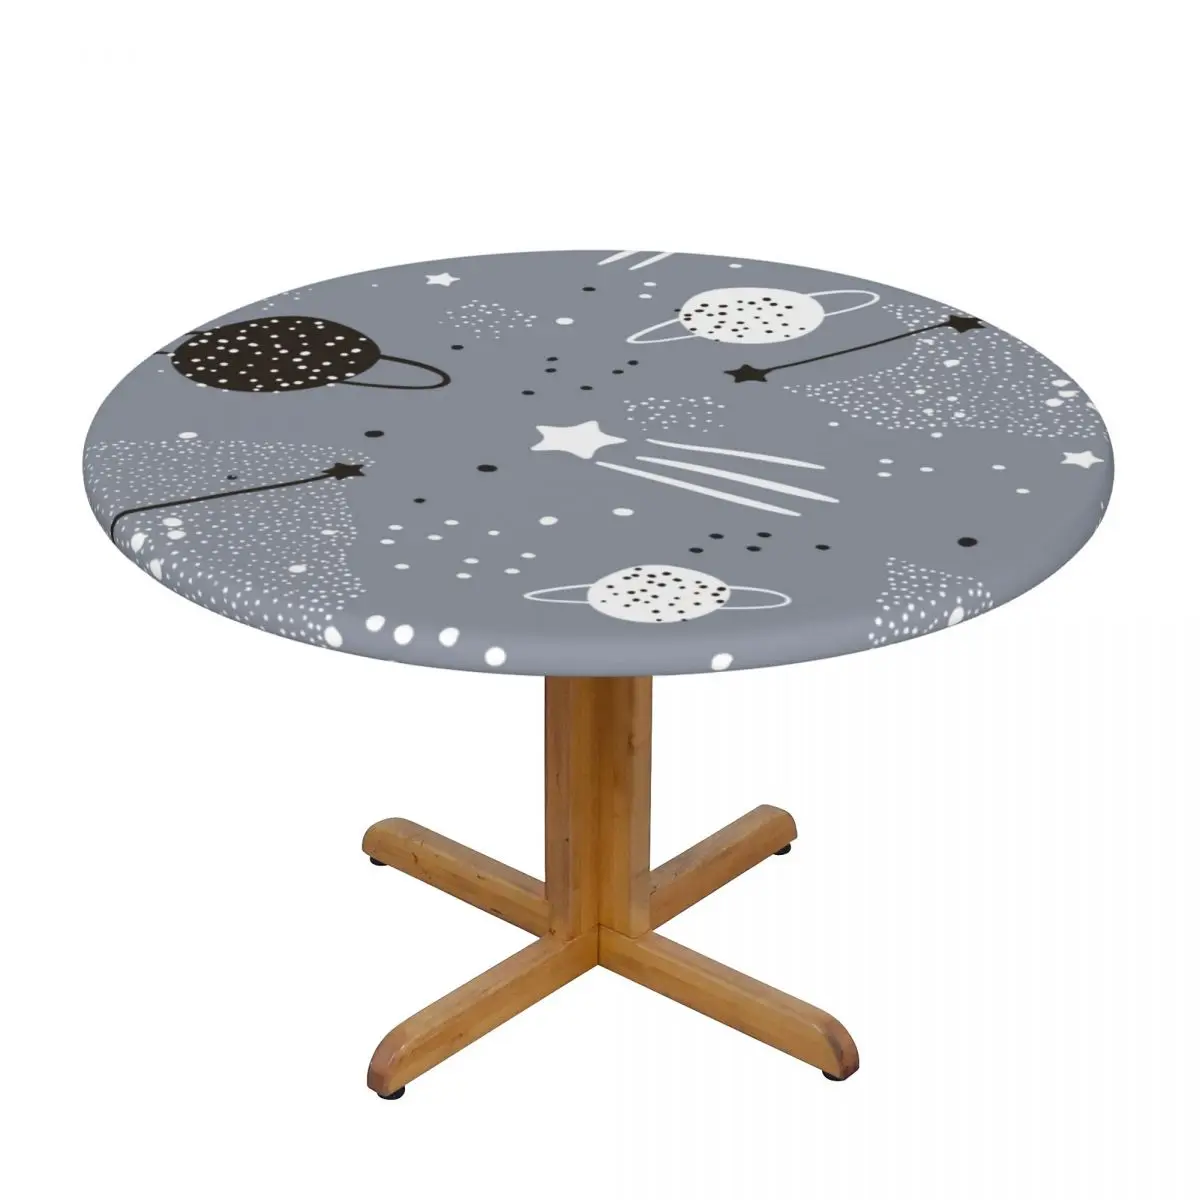 

Cute Stars Constellations Planets Waterproof Polyester Round Tablecloth Catering Fitted Table Cover with Elastic Edged